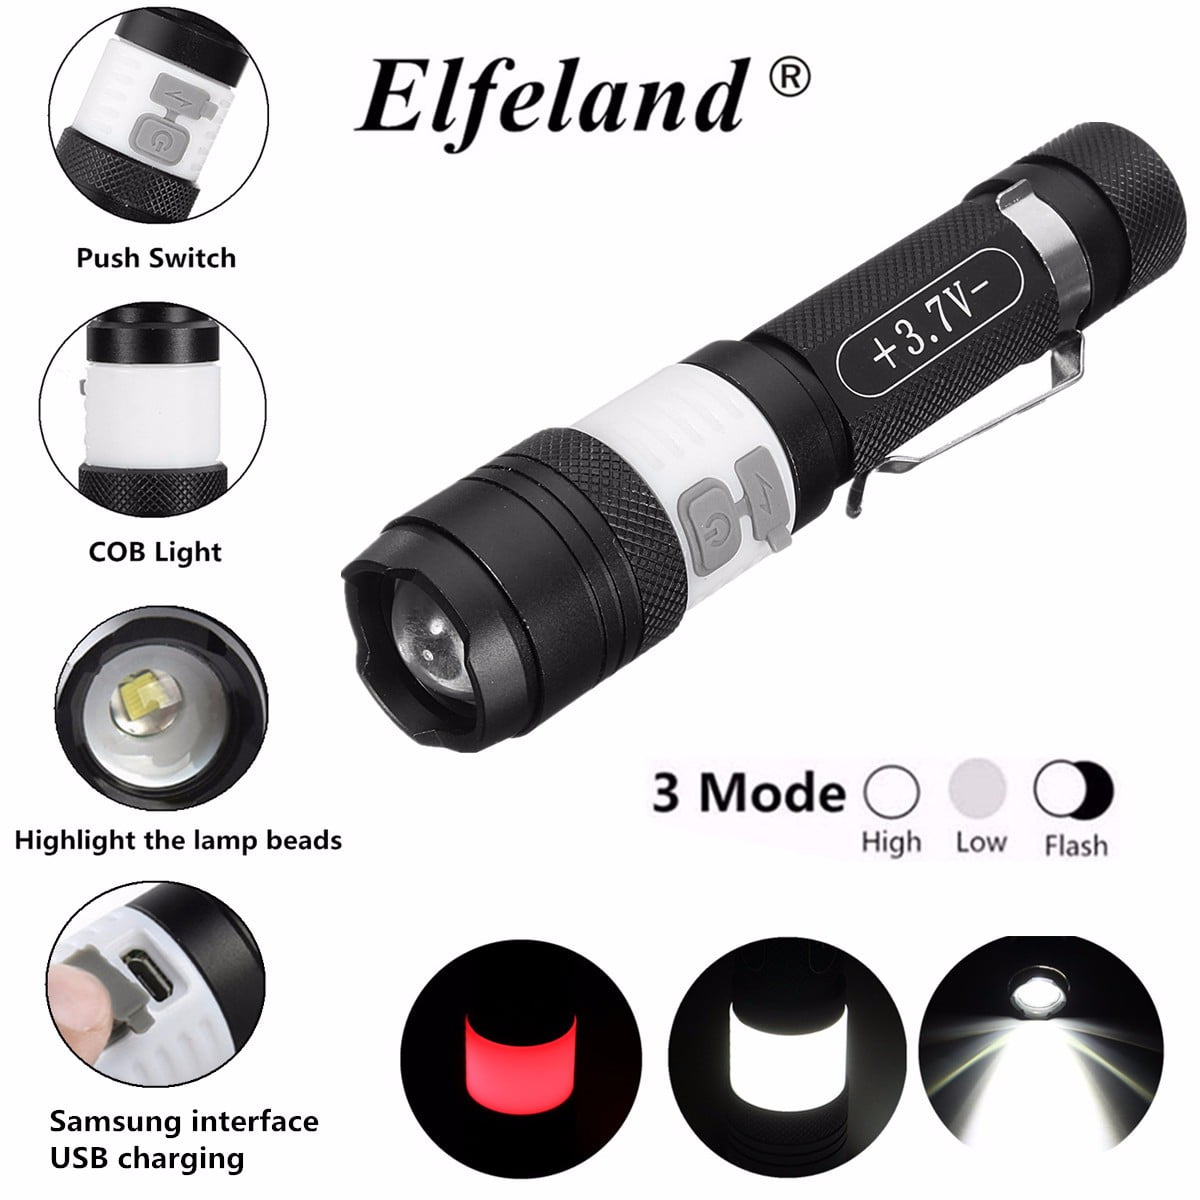 Details about  / Led 2 T6 Headlamp Torch Headlight Flashlight Rechargeable Lamp Tactical 990000lm